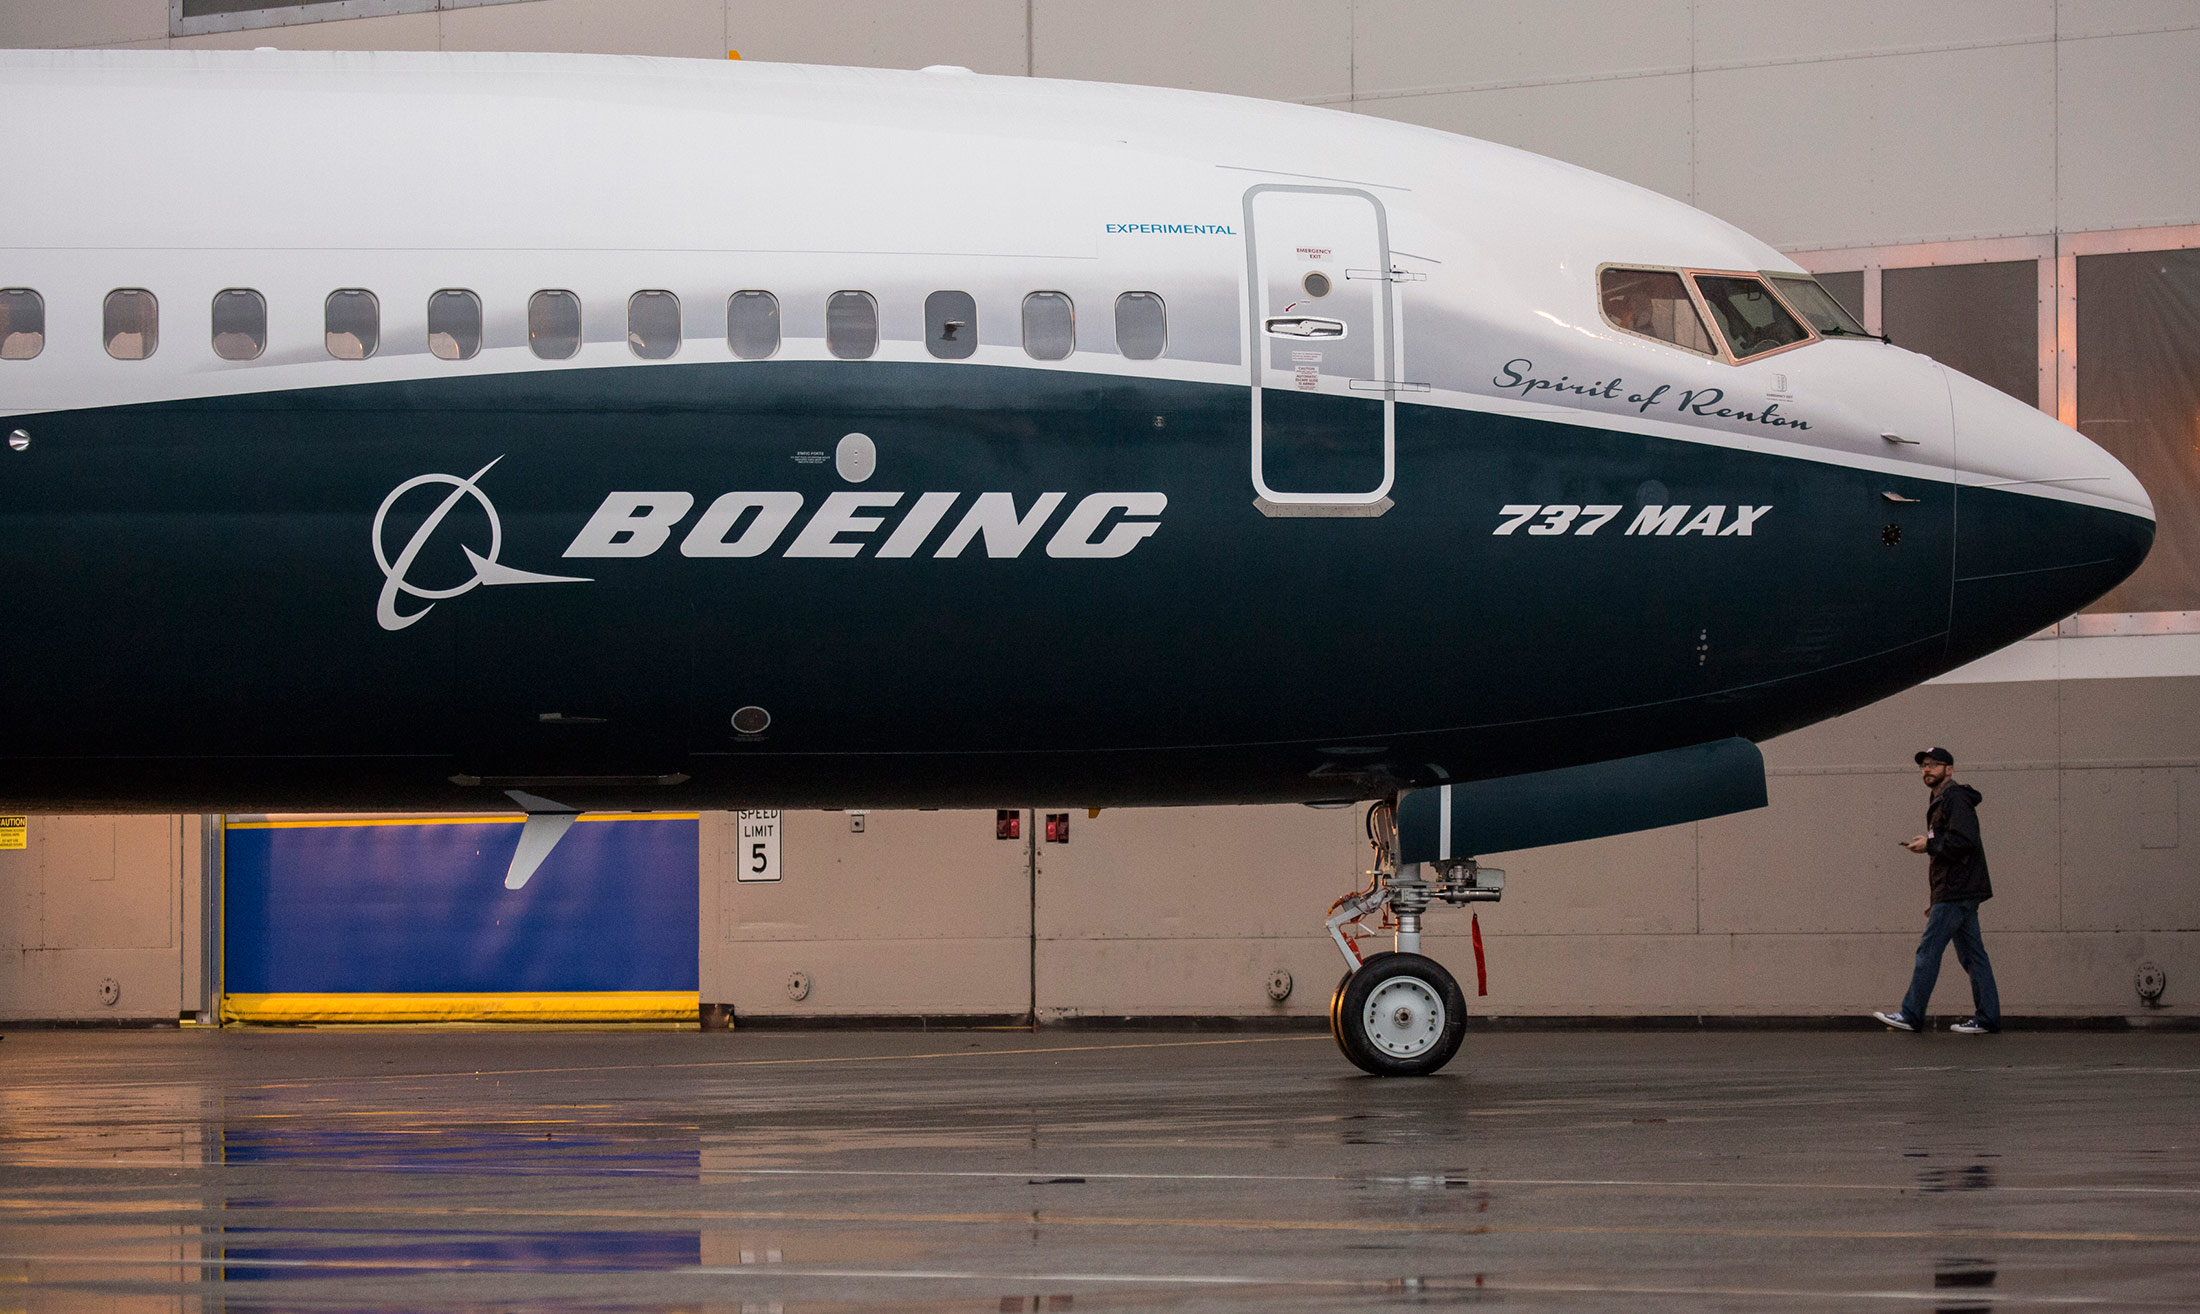 The first completed Boeing Co. 737 MAX airplane is pictured at the Boeing manufacturing facility in Renton, Washington, on Dec. 8.
